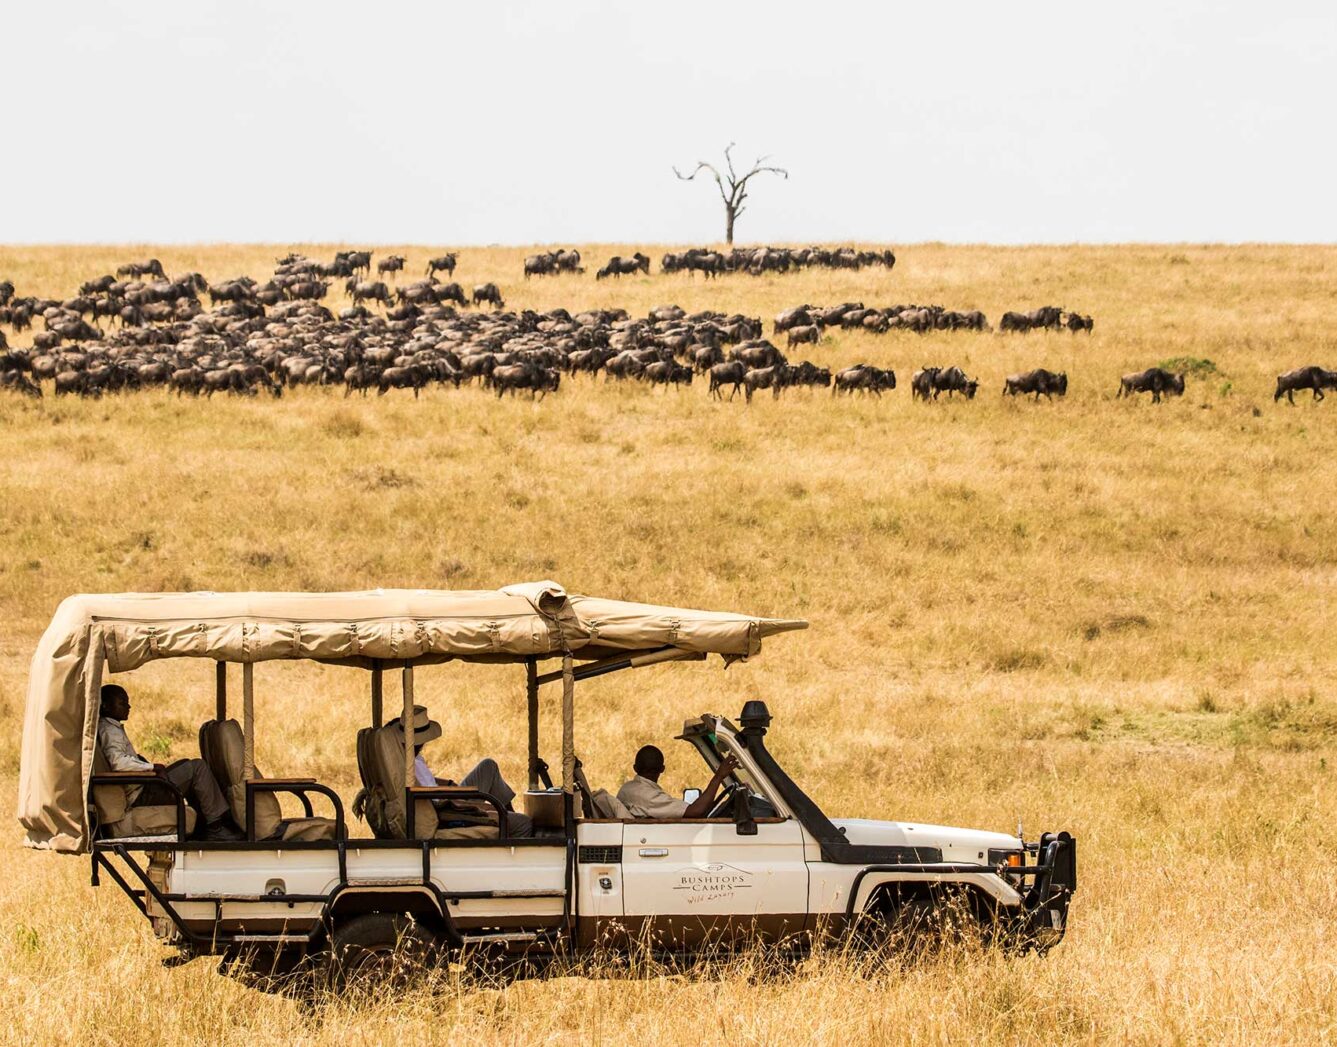 A rover driving past a herd of wildebeest